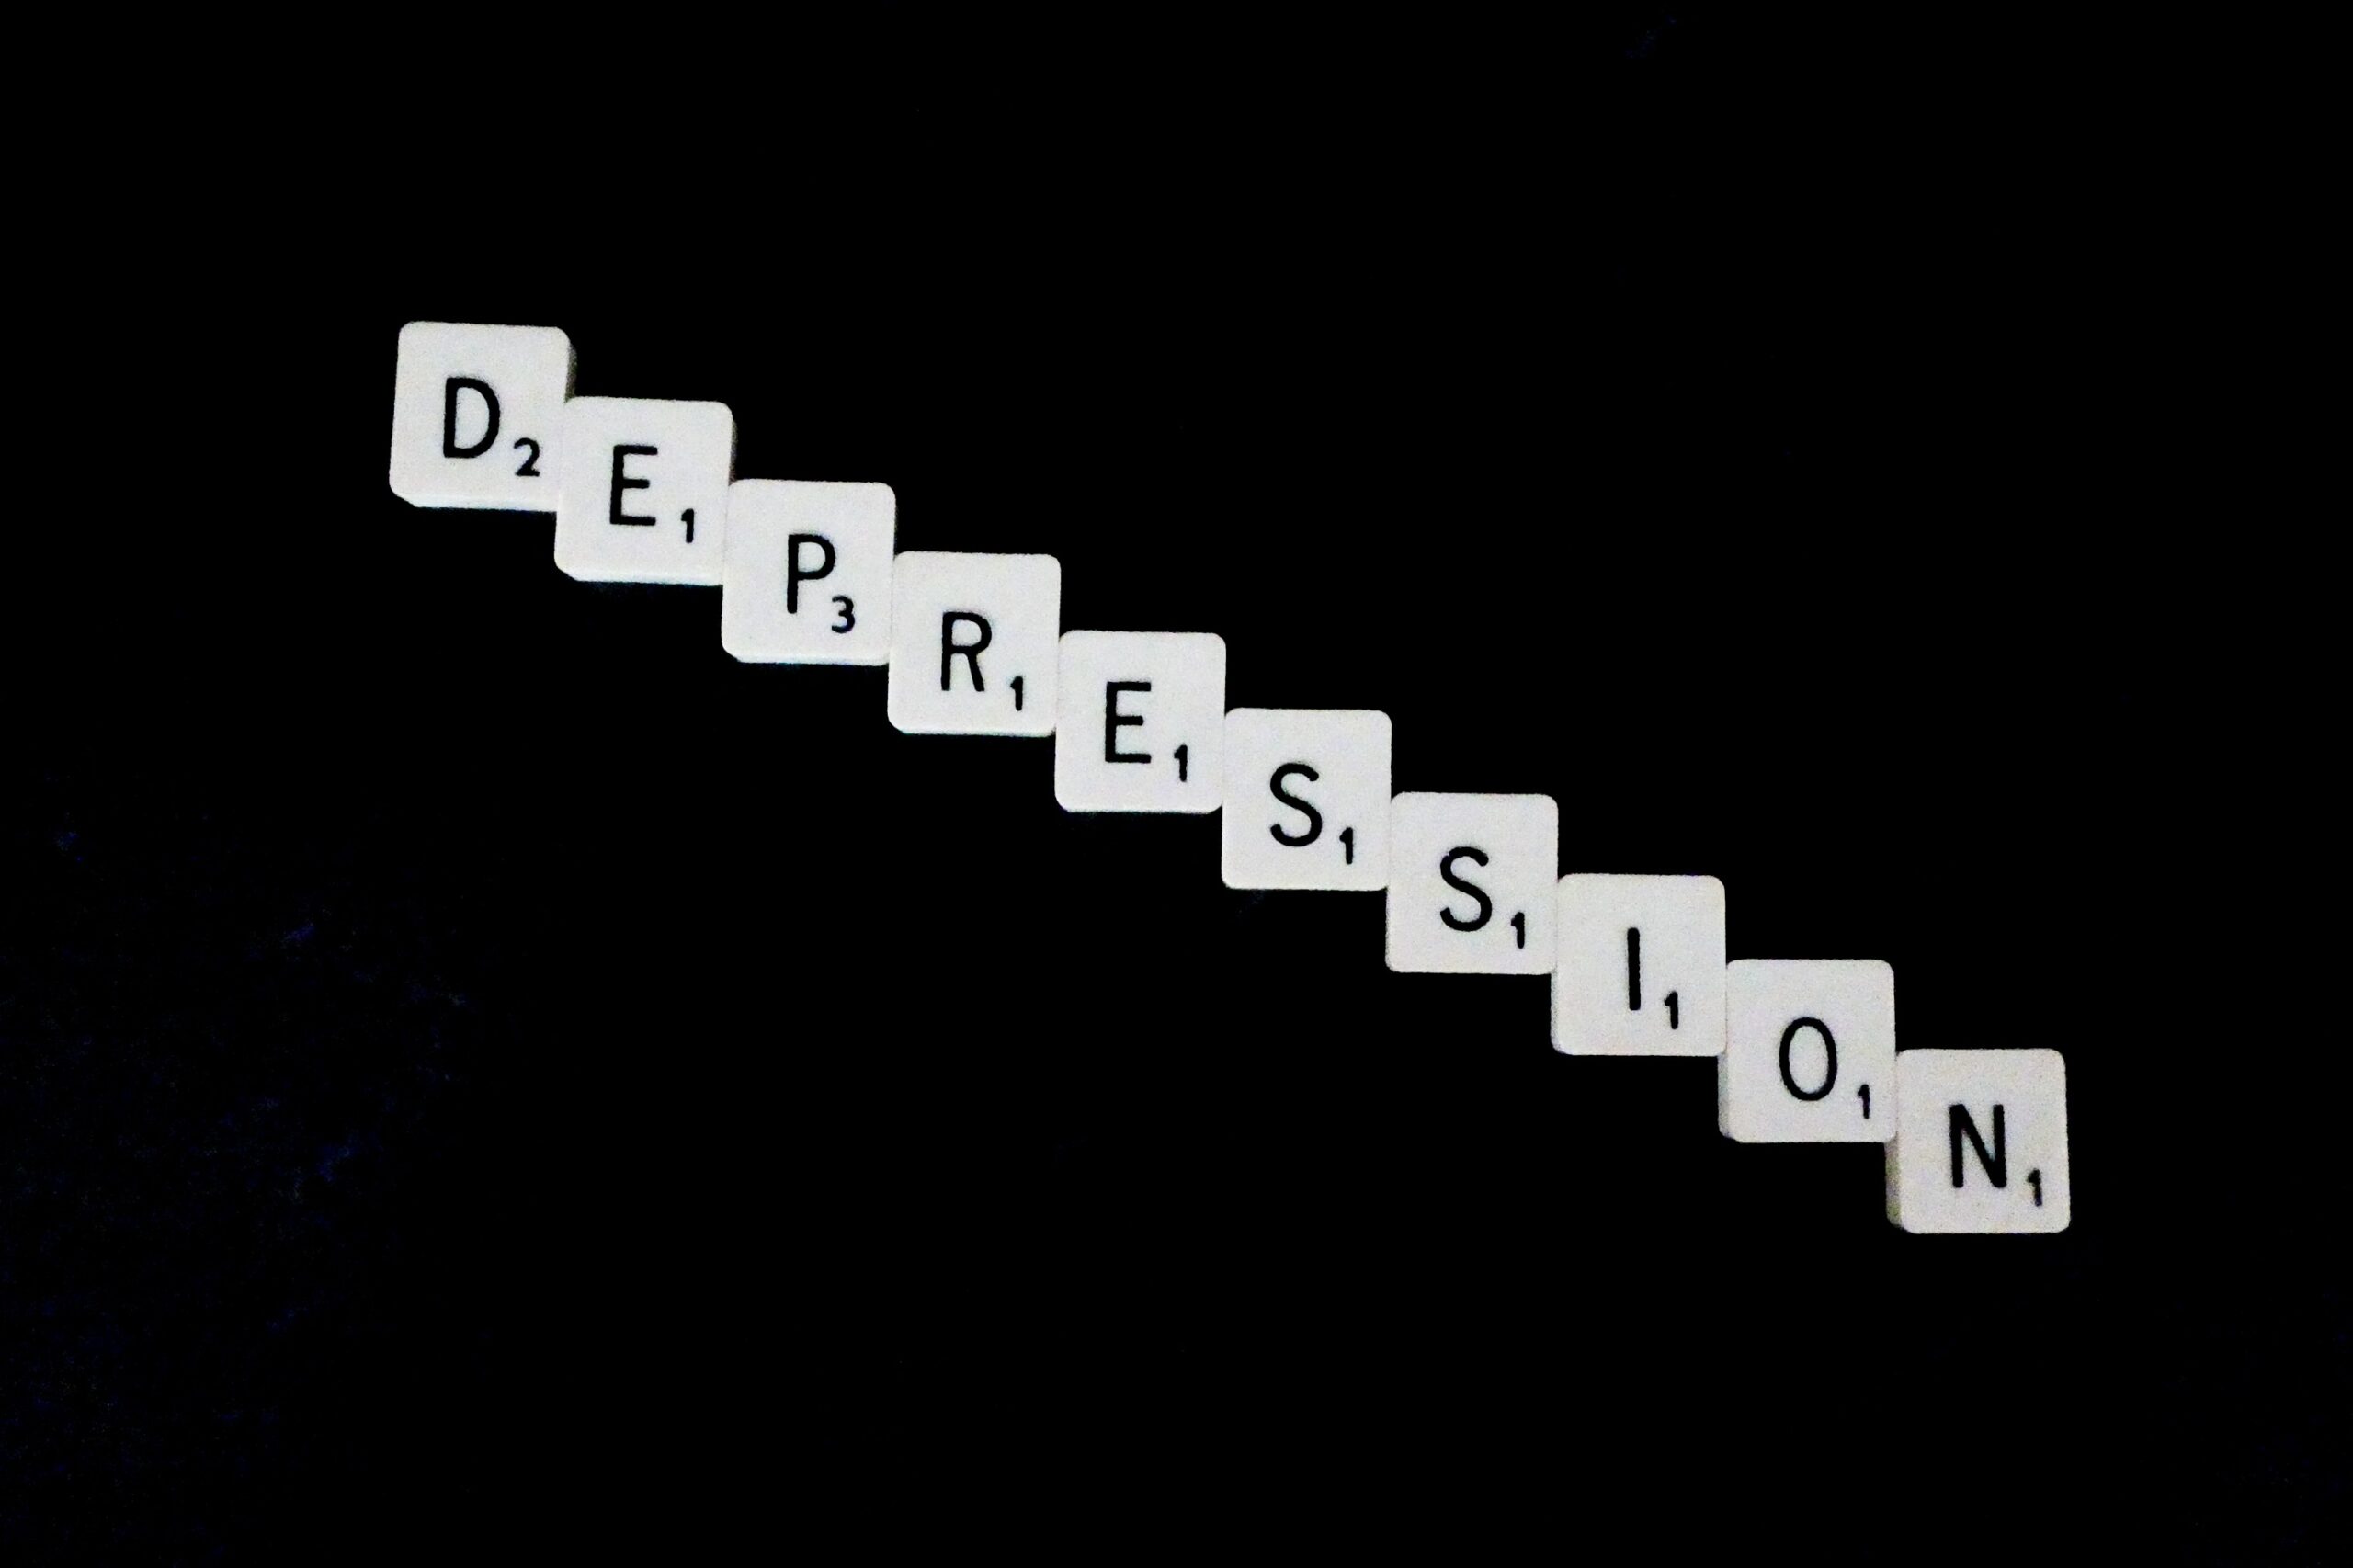 counselling for depression